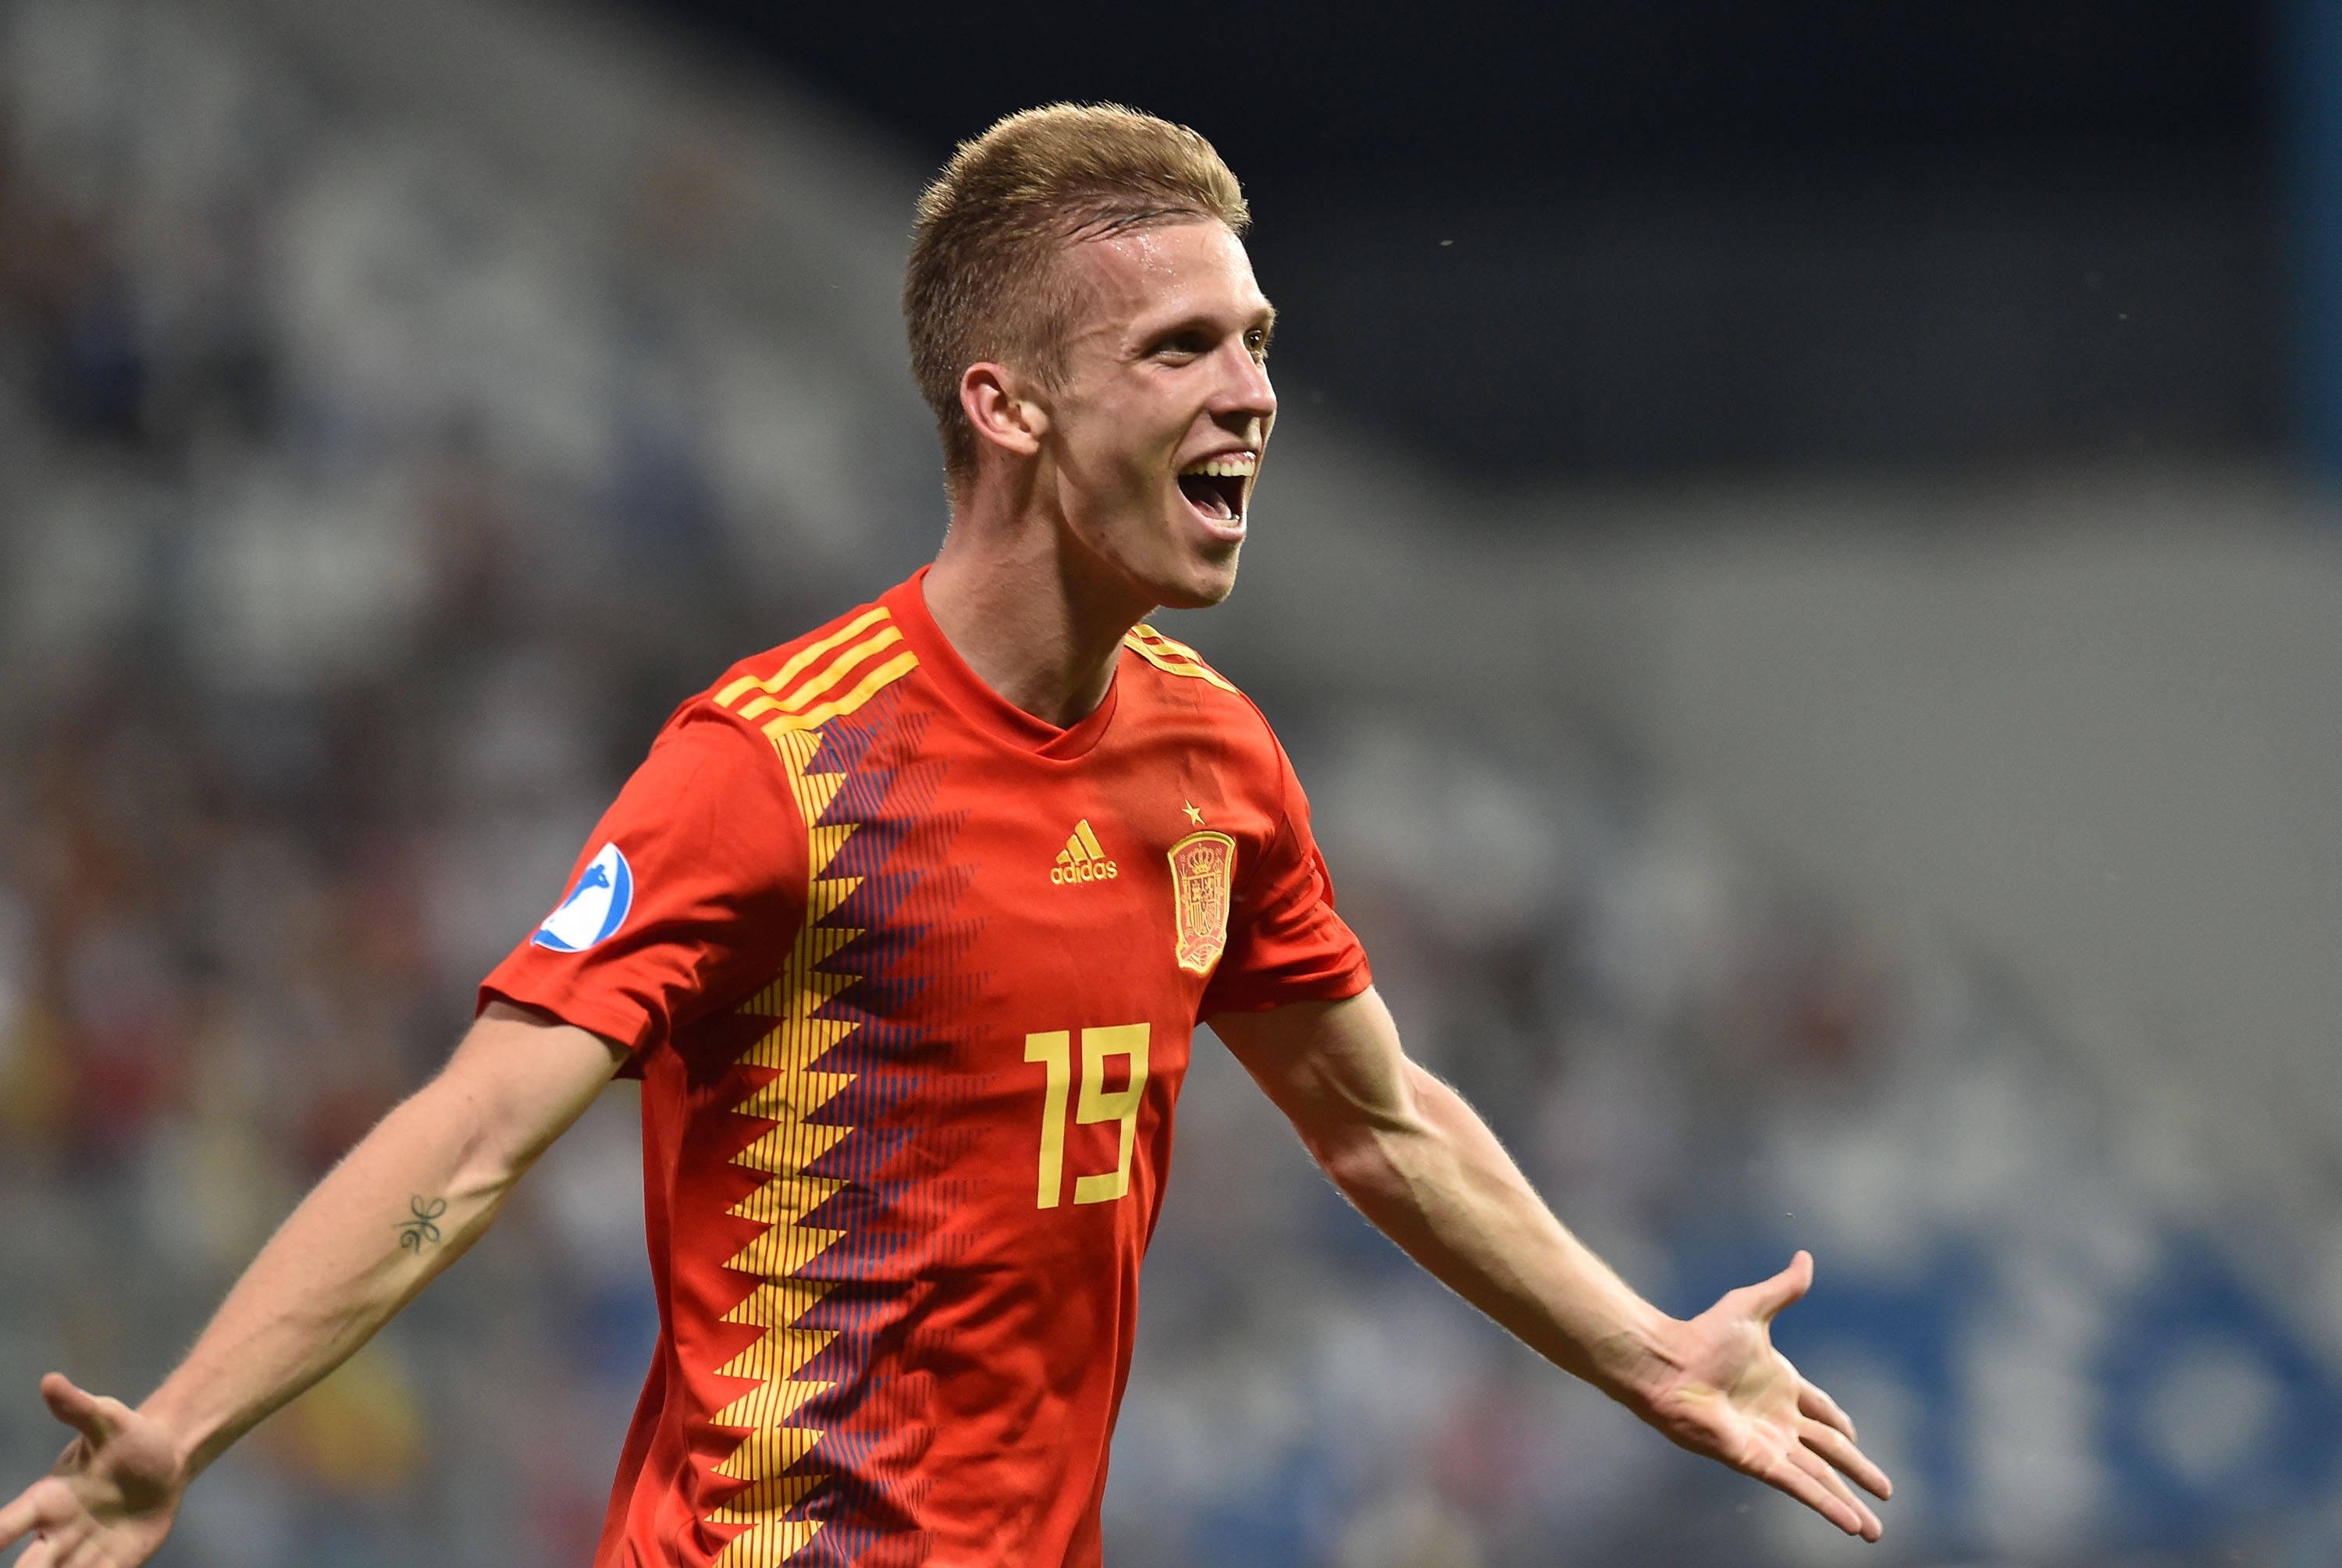 Discussions held between Barcelona, Manchester City and Dani Olmo